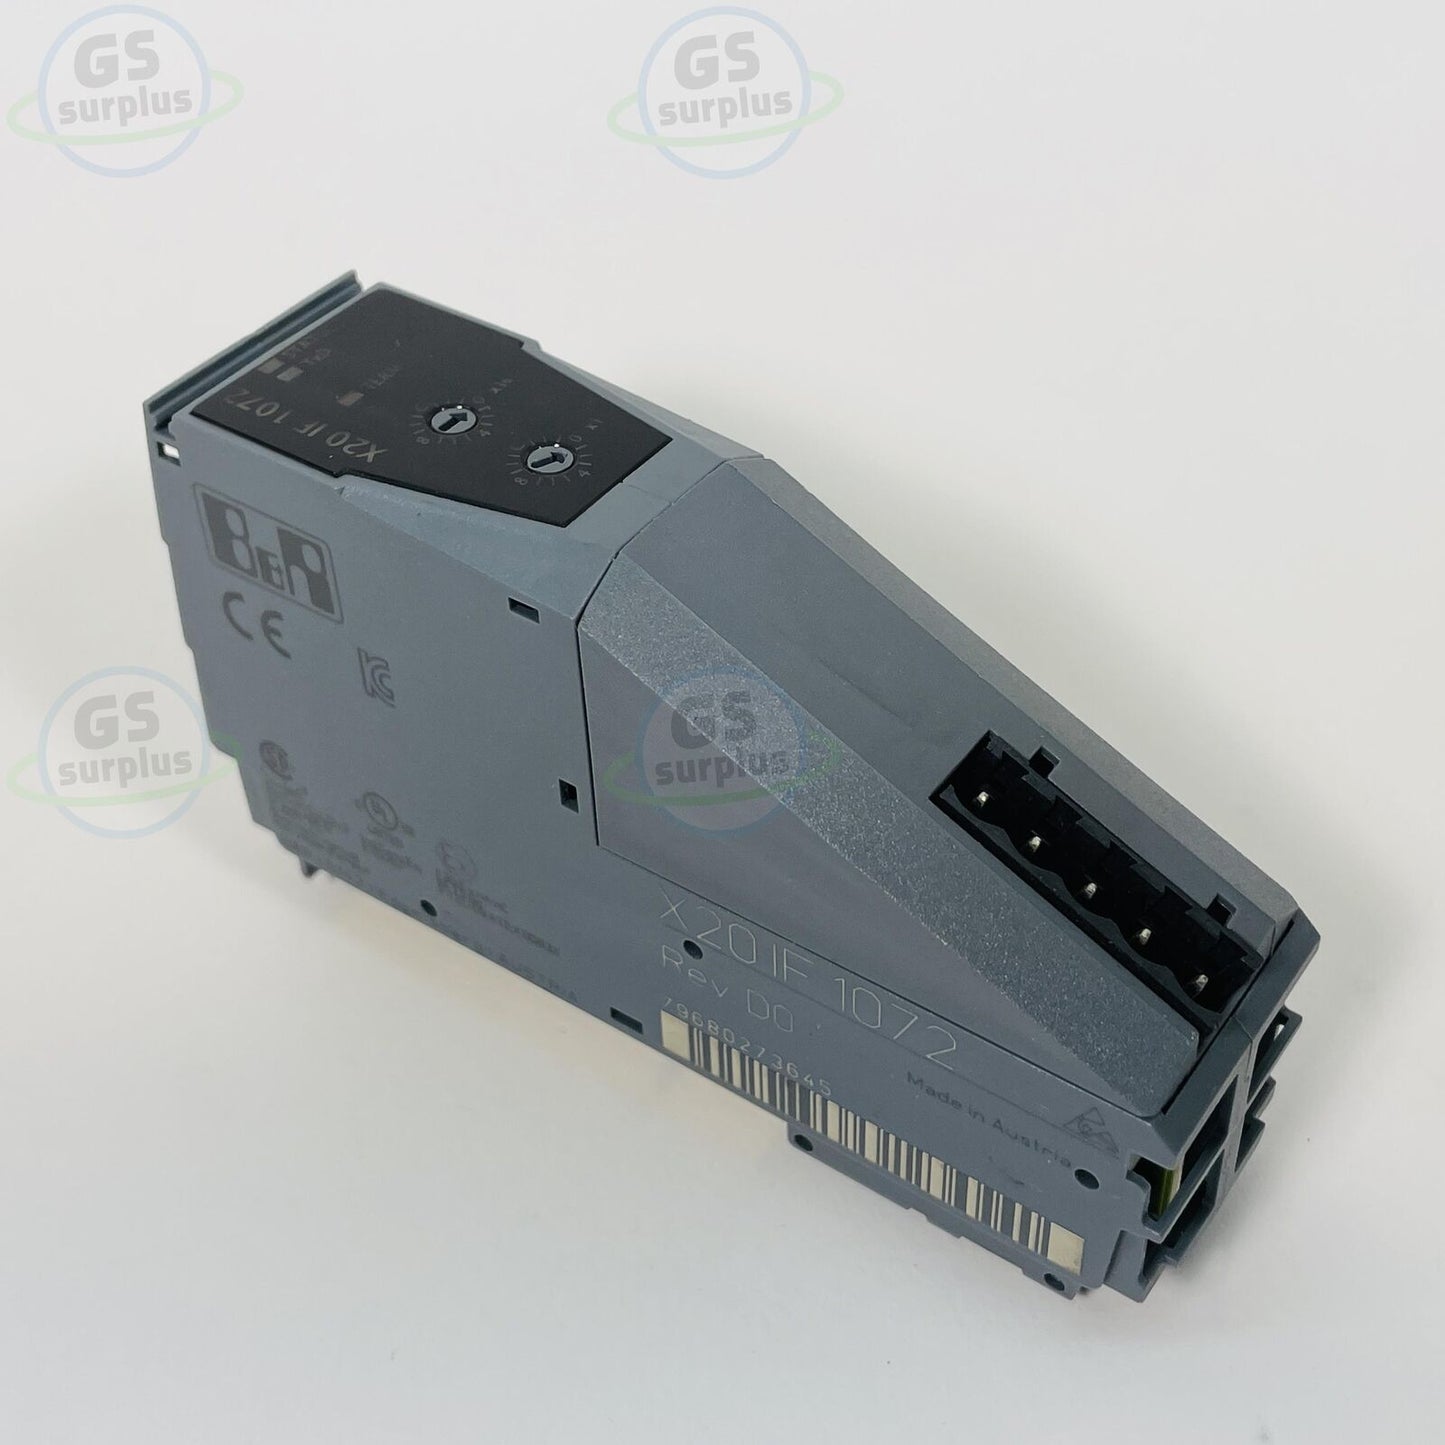 New B&R X20 IF 1072 / X20IF1072 CAN Bus Connection Module